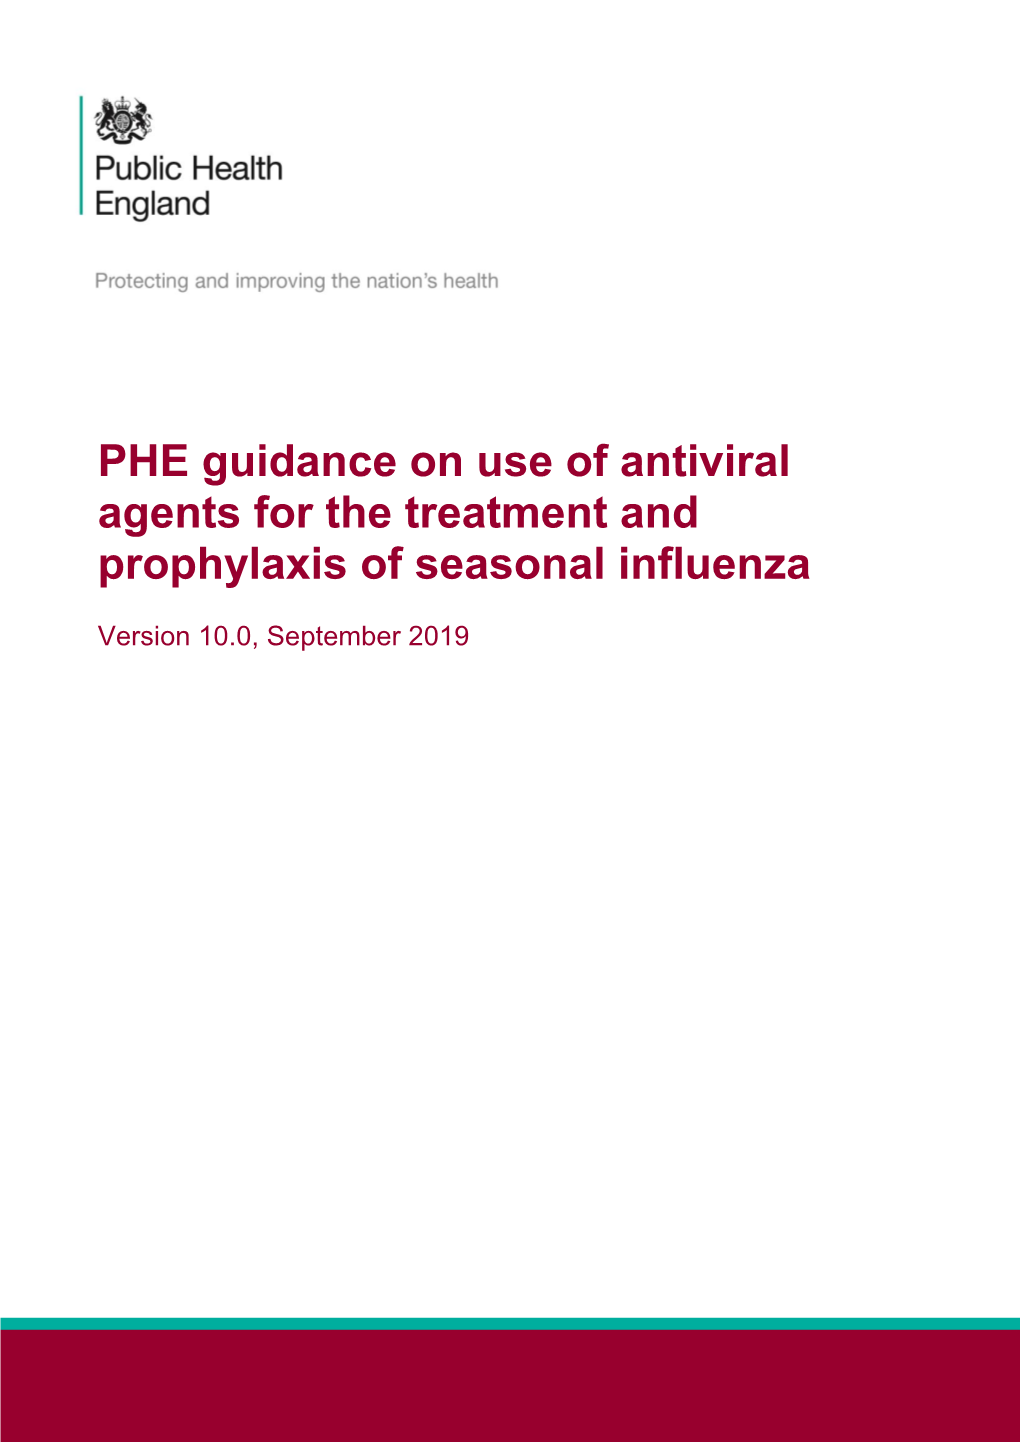 PHE Guidance on Use of Antiviral Agents for the Treatment and Prophylaxis of Influenza V10.0